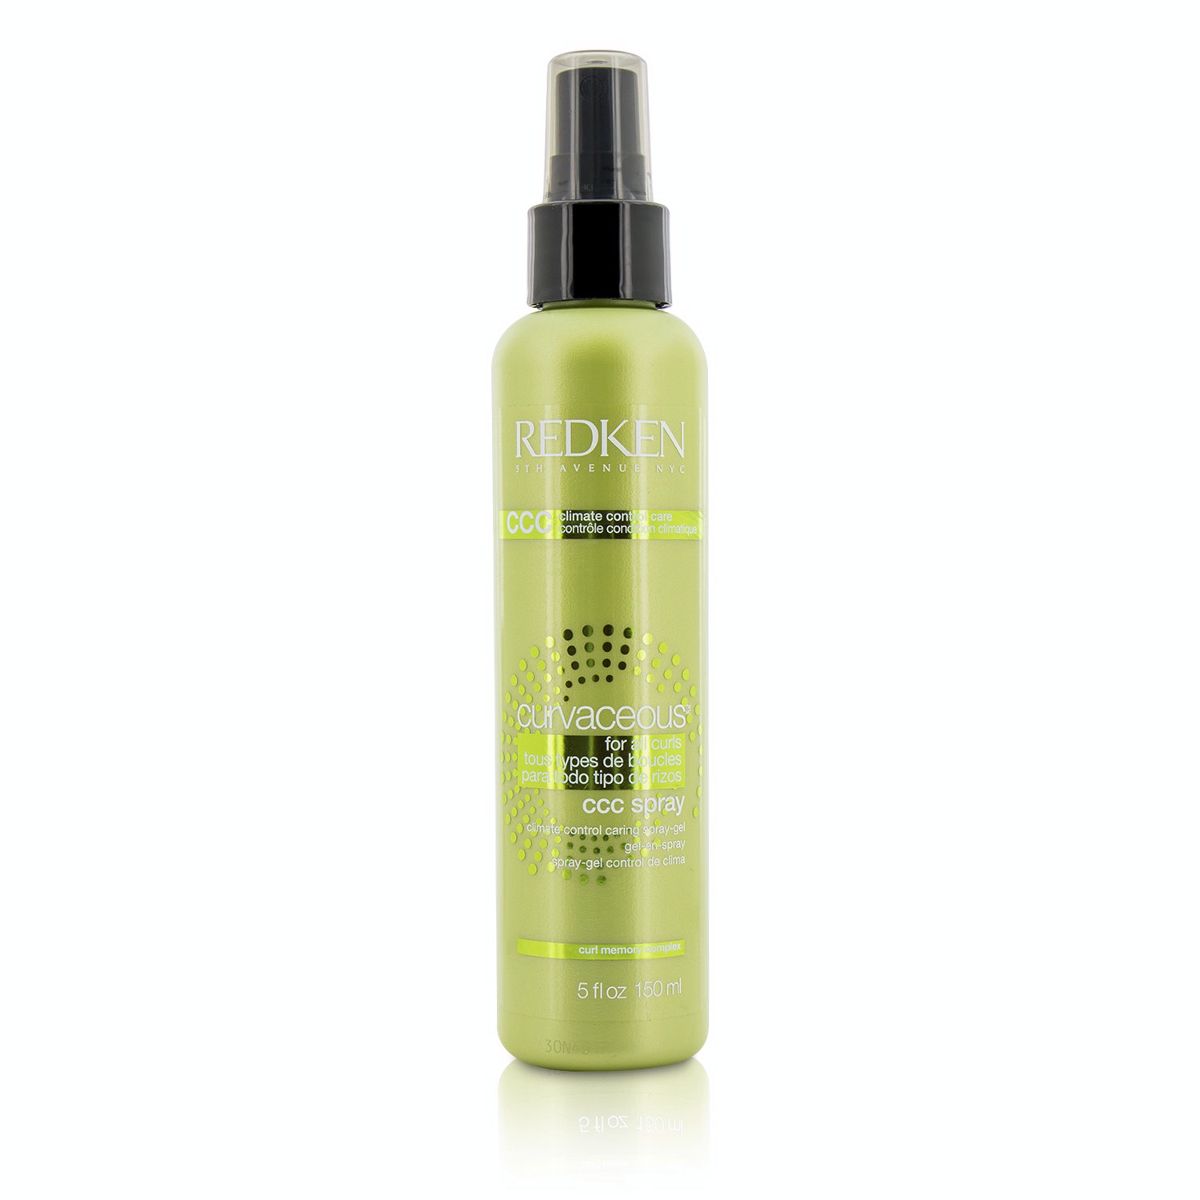 Curvaceous CCC Spray Climate Control Caring Spray-Gel (For All Curls) Redken Image